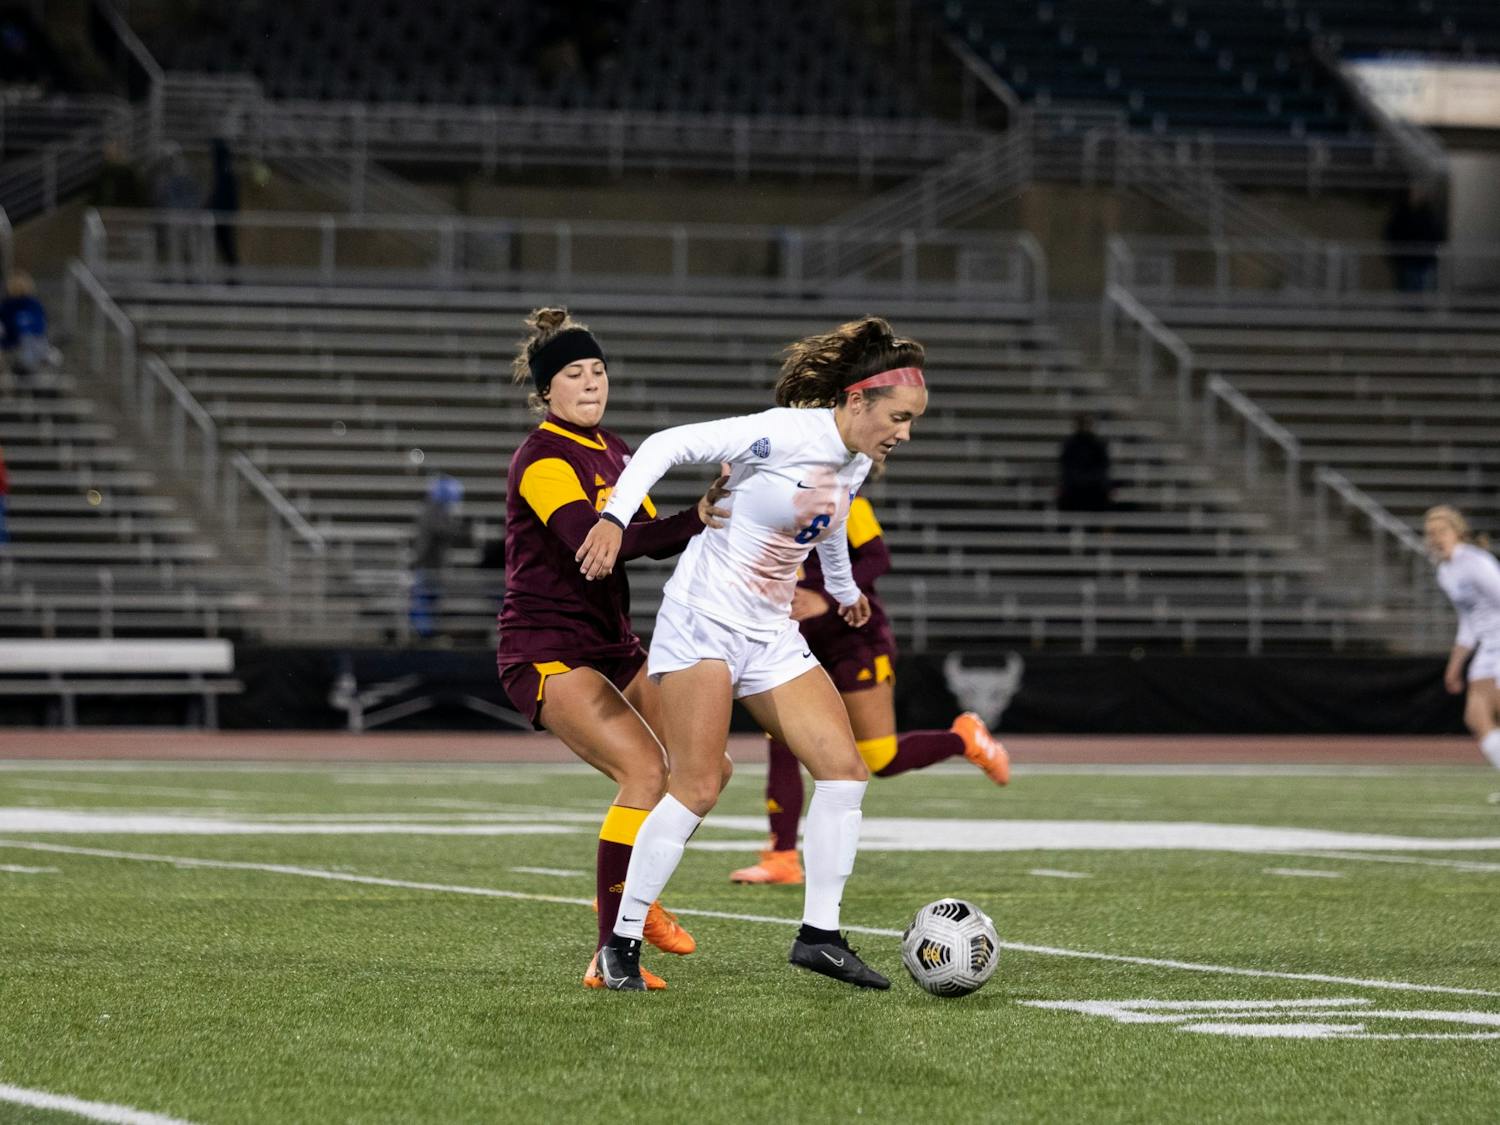 Freshman midfielder Katie Krohn dribbles the ball in UB's 2-1 victory against Central Michigan on Thursday.